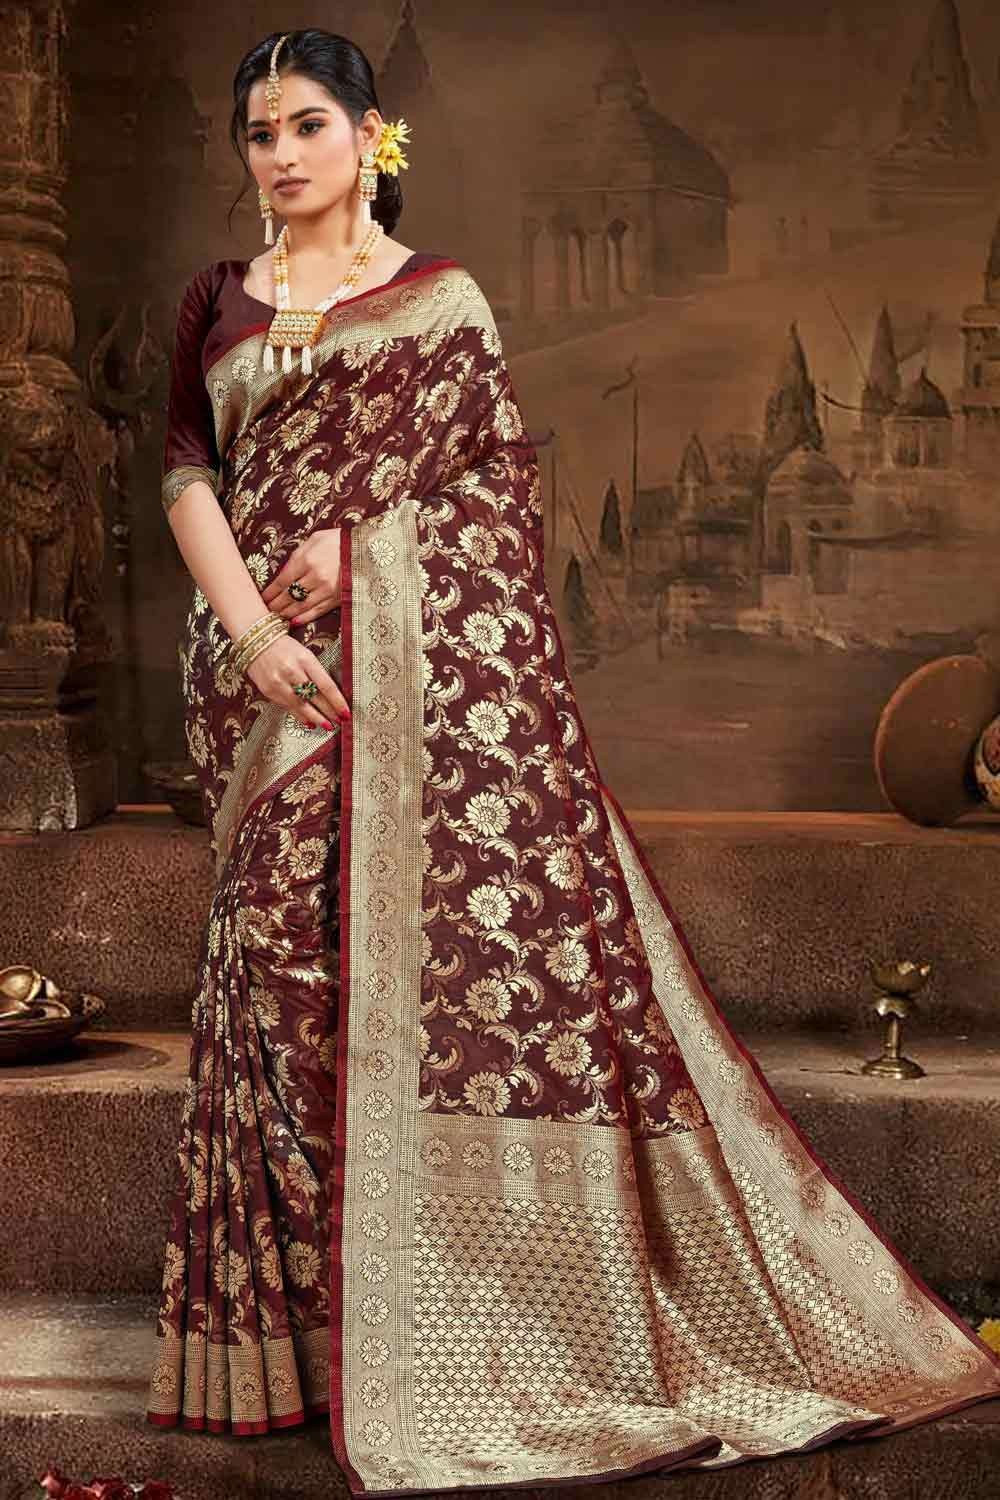 What is the cost of an Indian wedding saree? - Quora